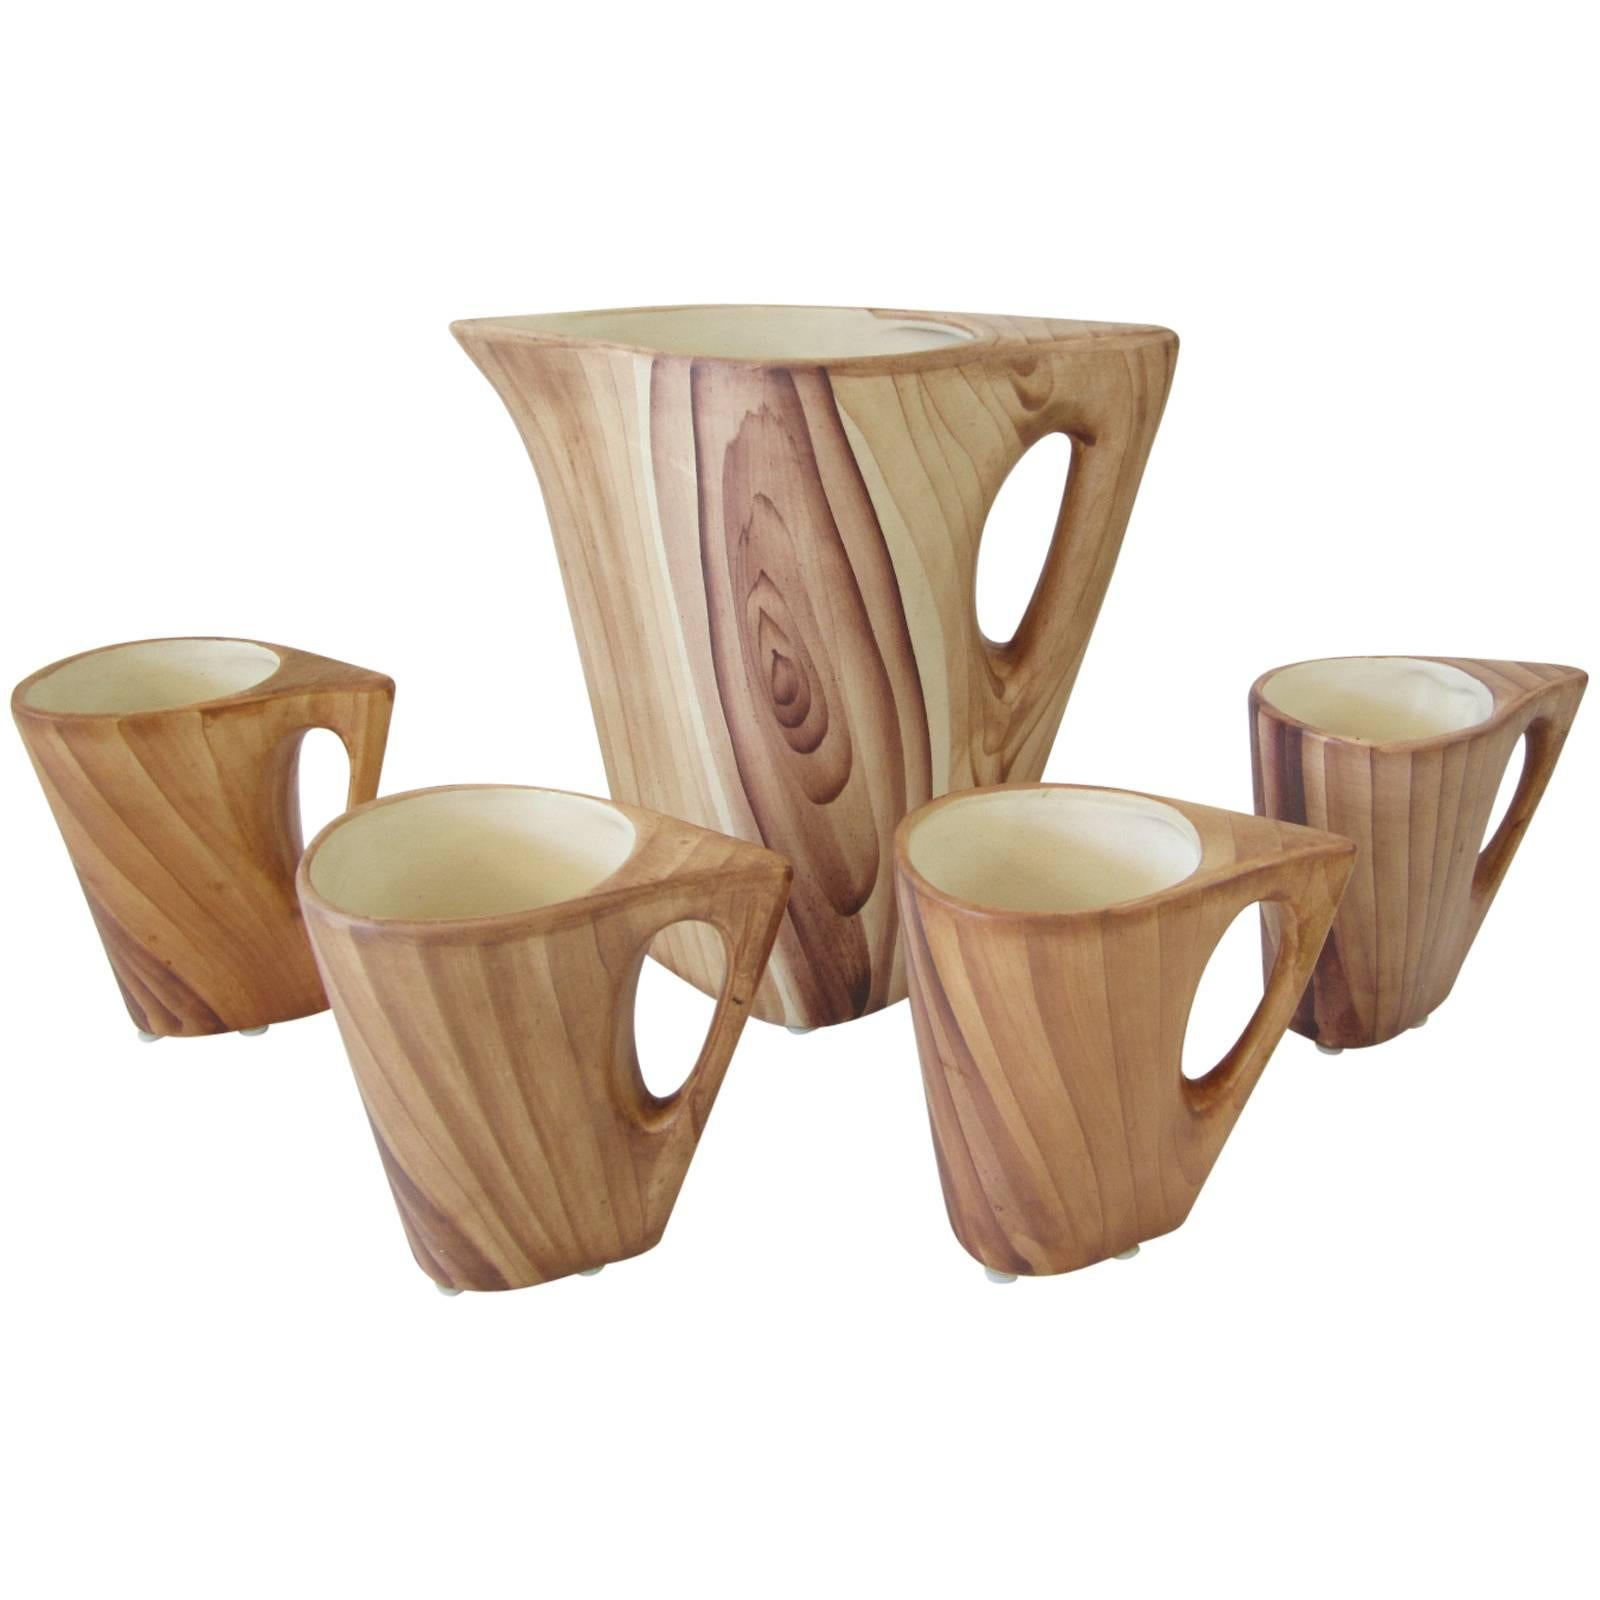 Vallauris Faux Bois Ceramic Lemonade Set with Pitcher and Four Cups